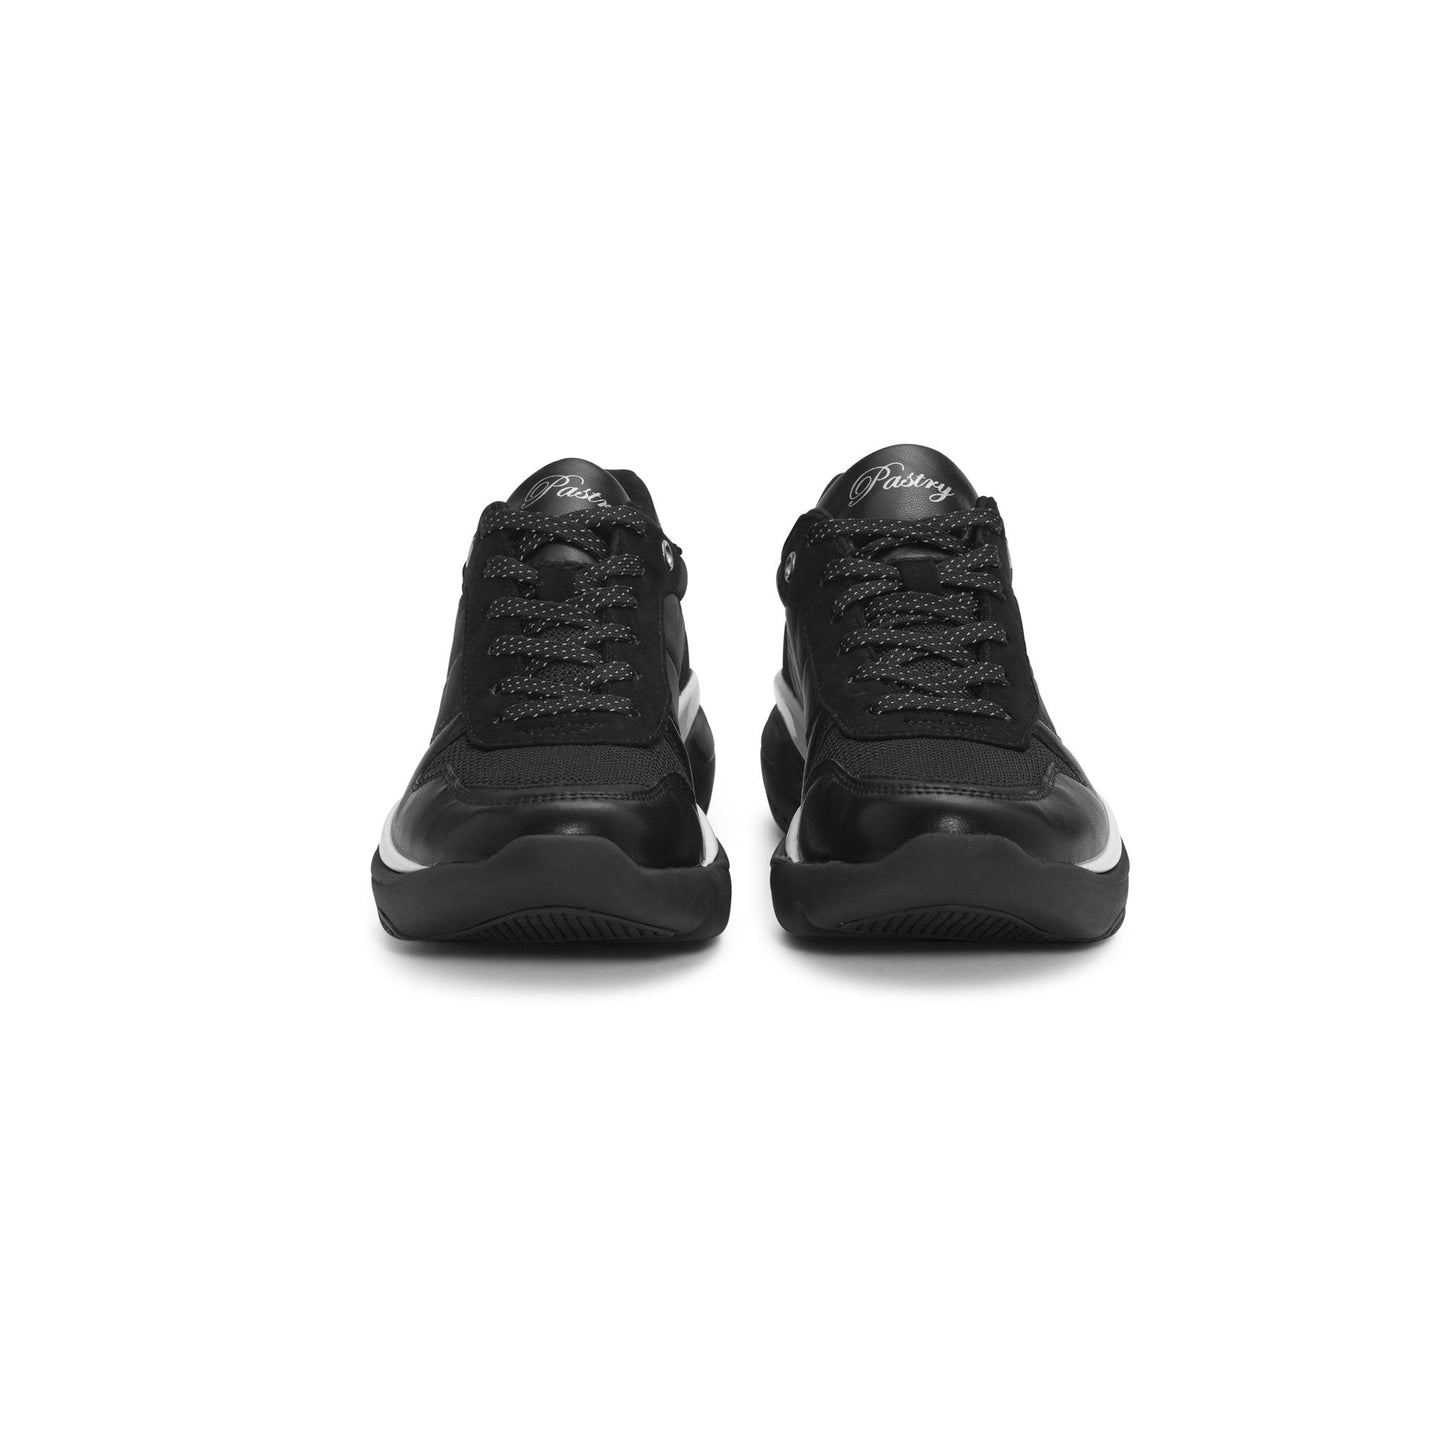 Pair of Pastry Adult Women's Carla Sneaker in Black/White front view